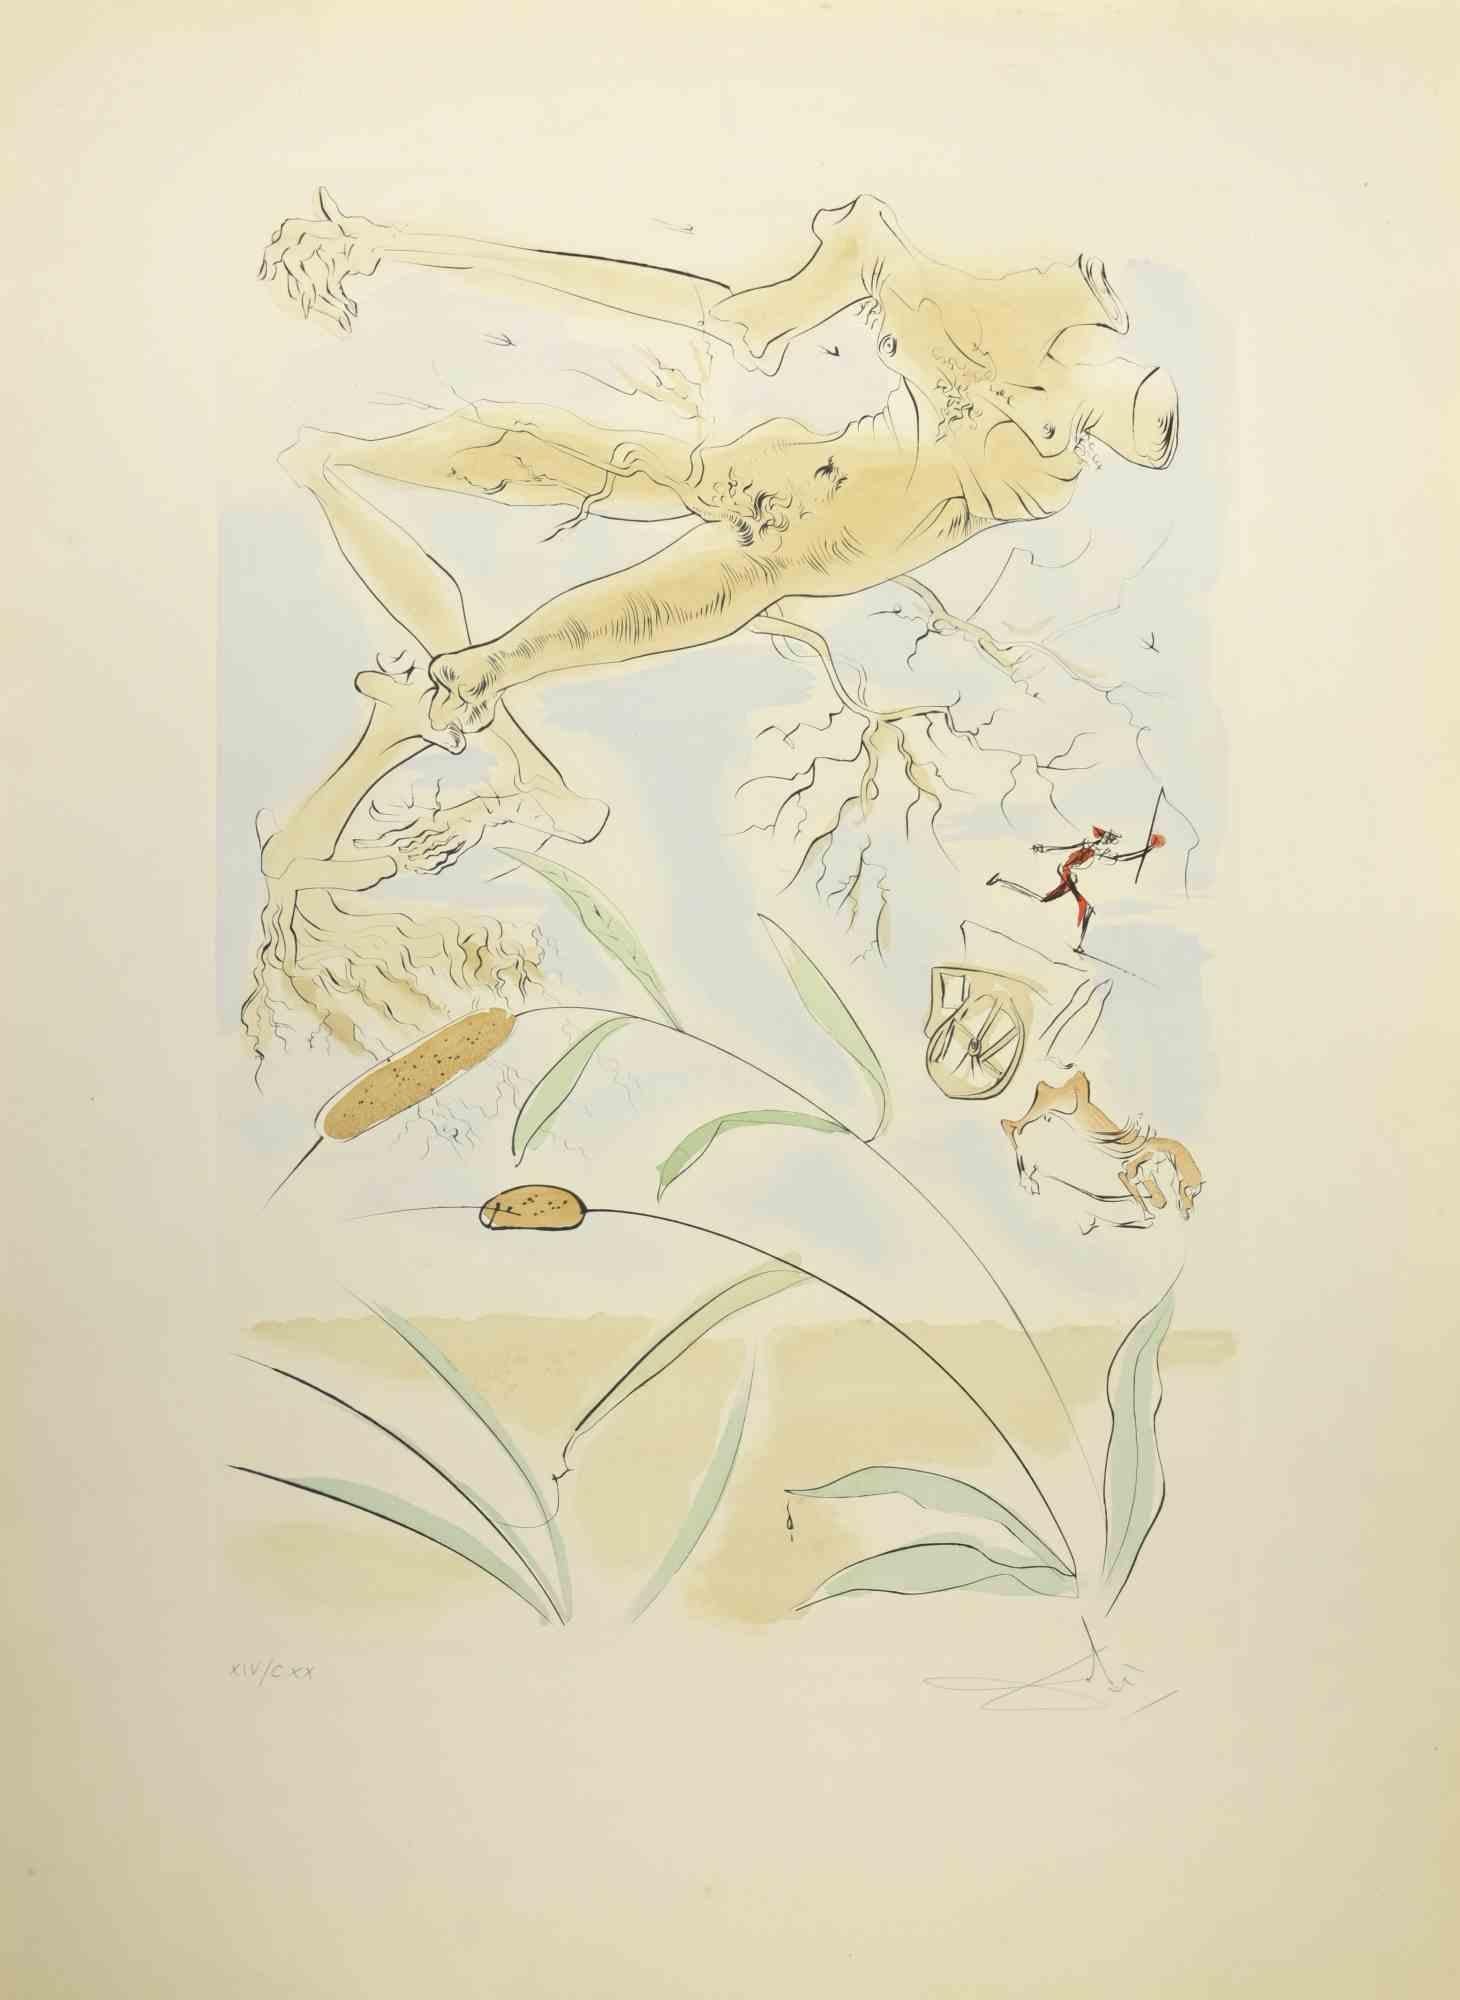 Salvador Dalí Figurative Print - The Oak and the Reed - Lithograph  - 1974